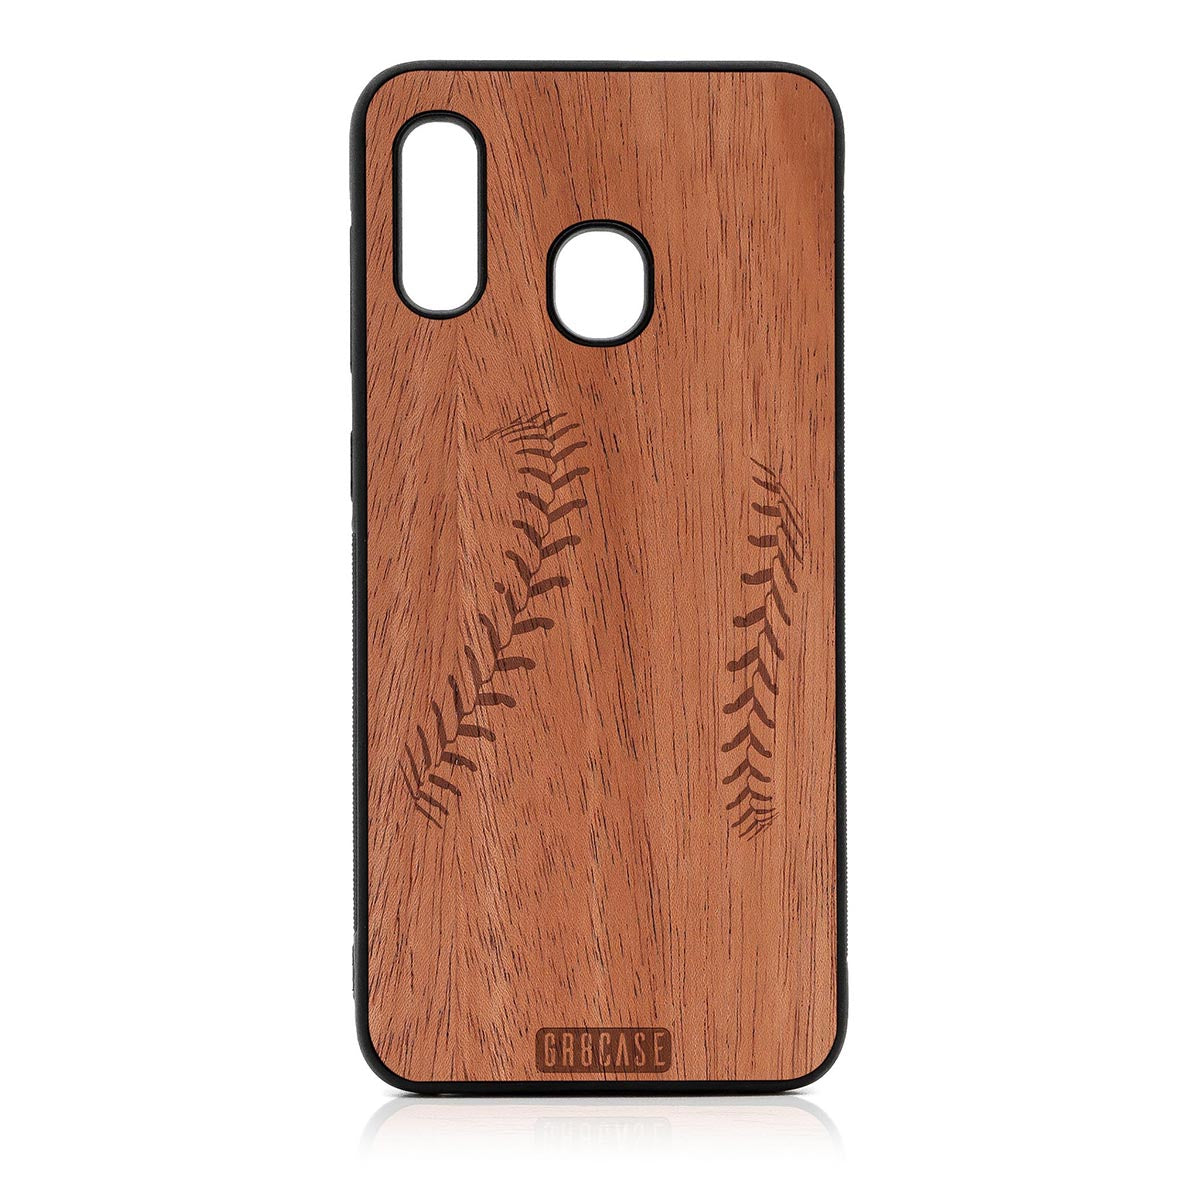 Baseball Stitches Design Wood Case For Samsung Galaxy A20 by GR8CASE